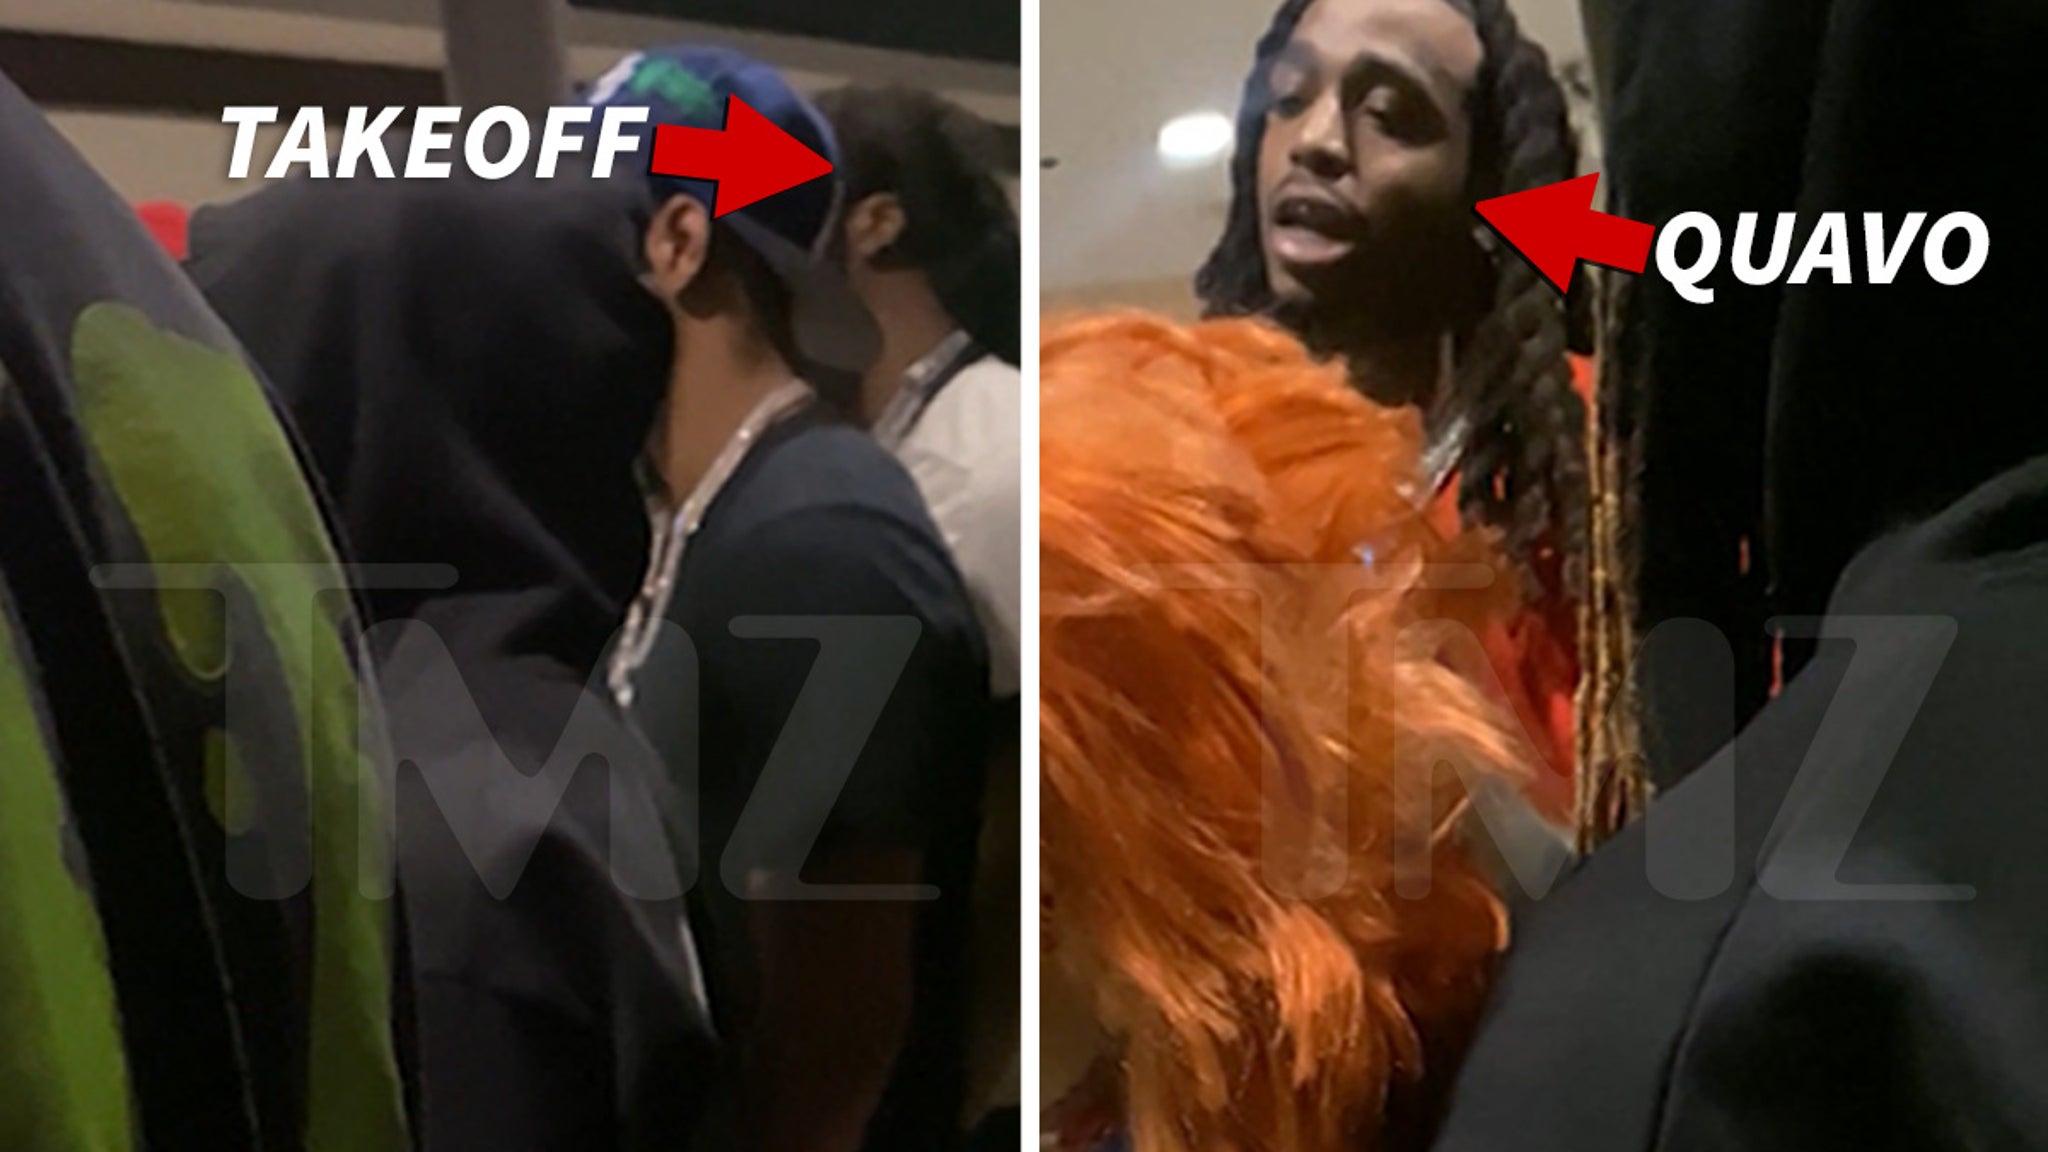 New Video Shows Quavo Arguing with Others Before Gunfire Kills Takeoff